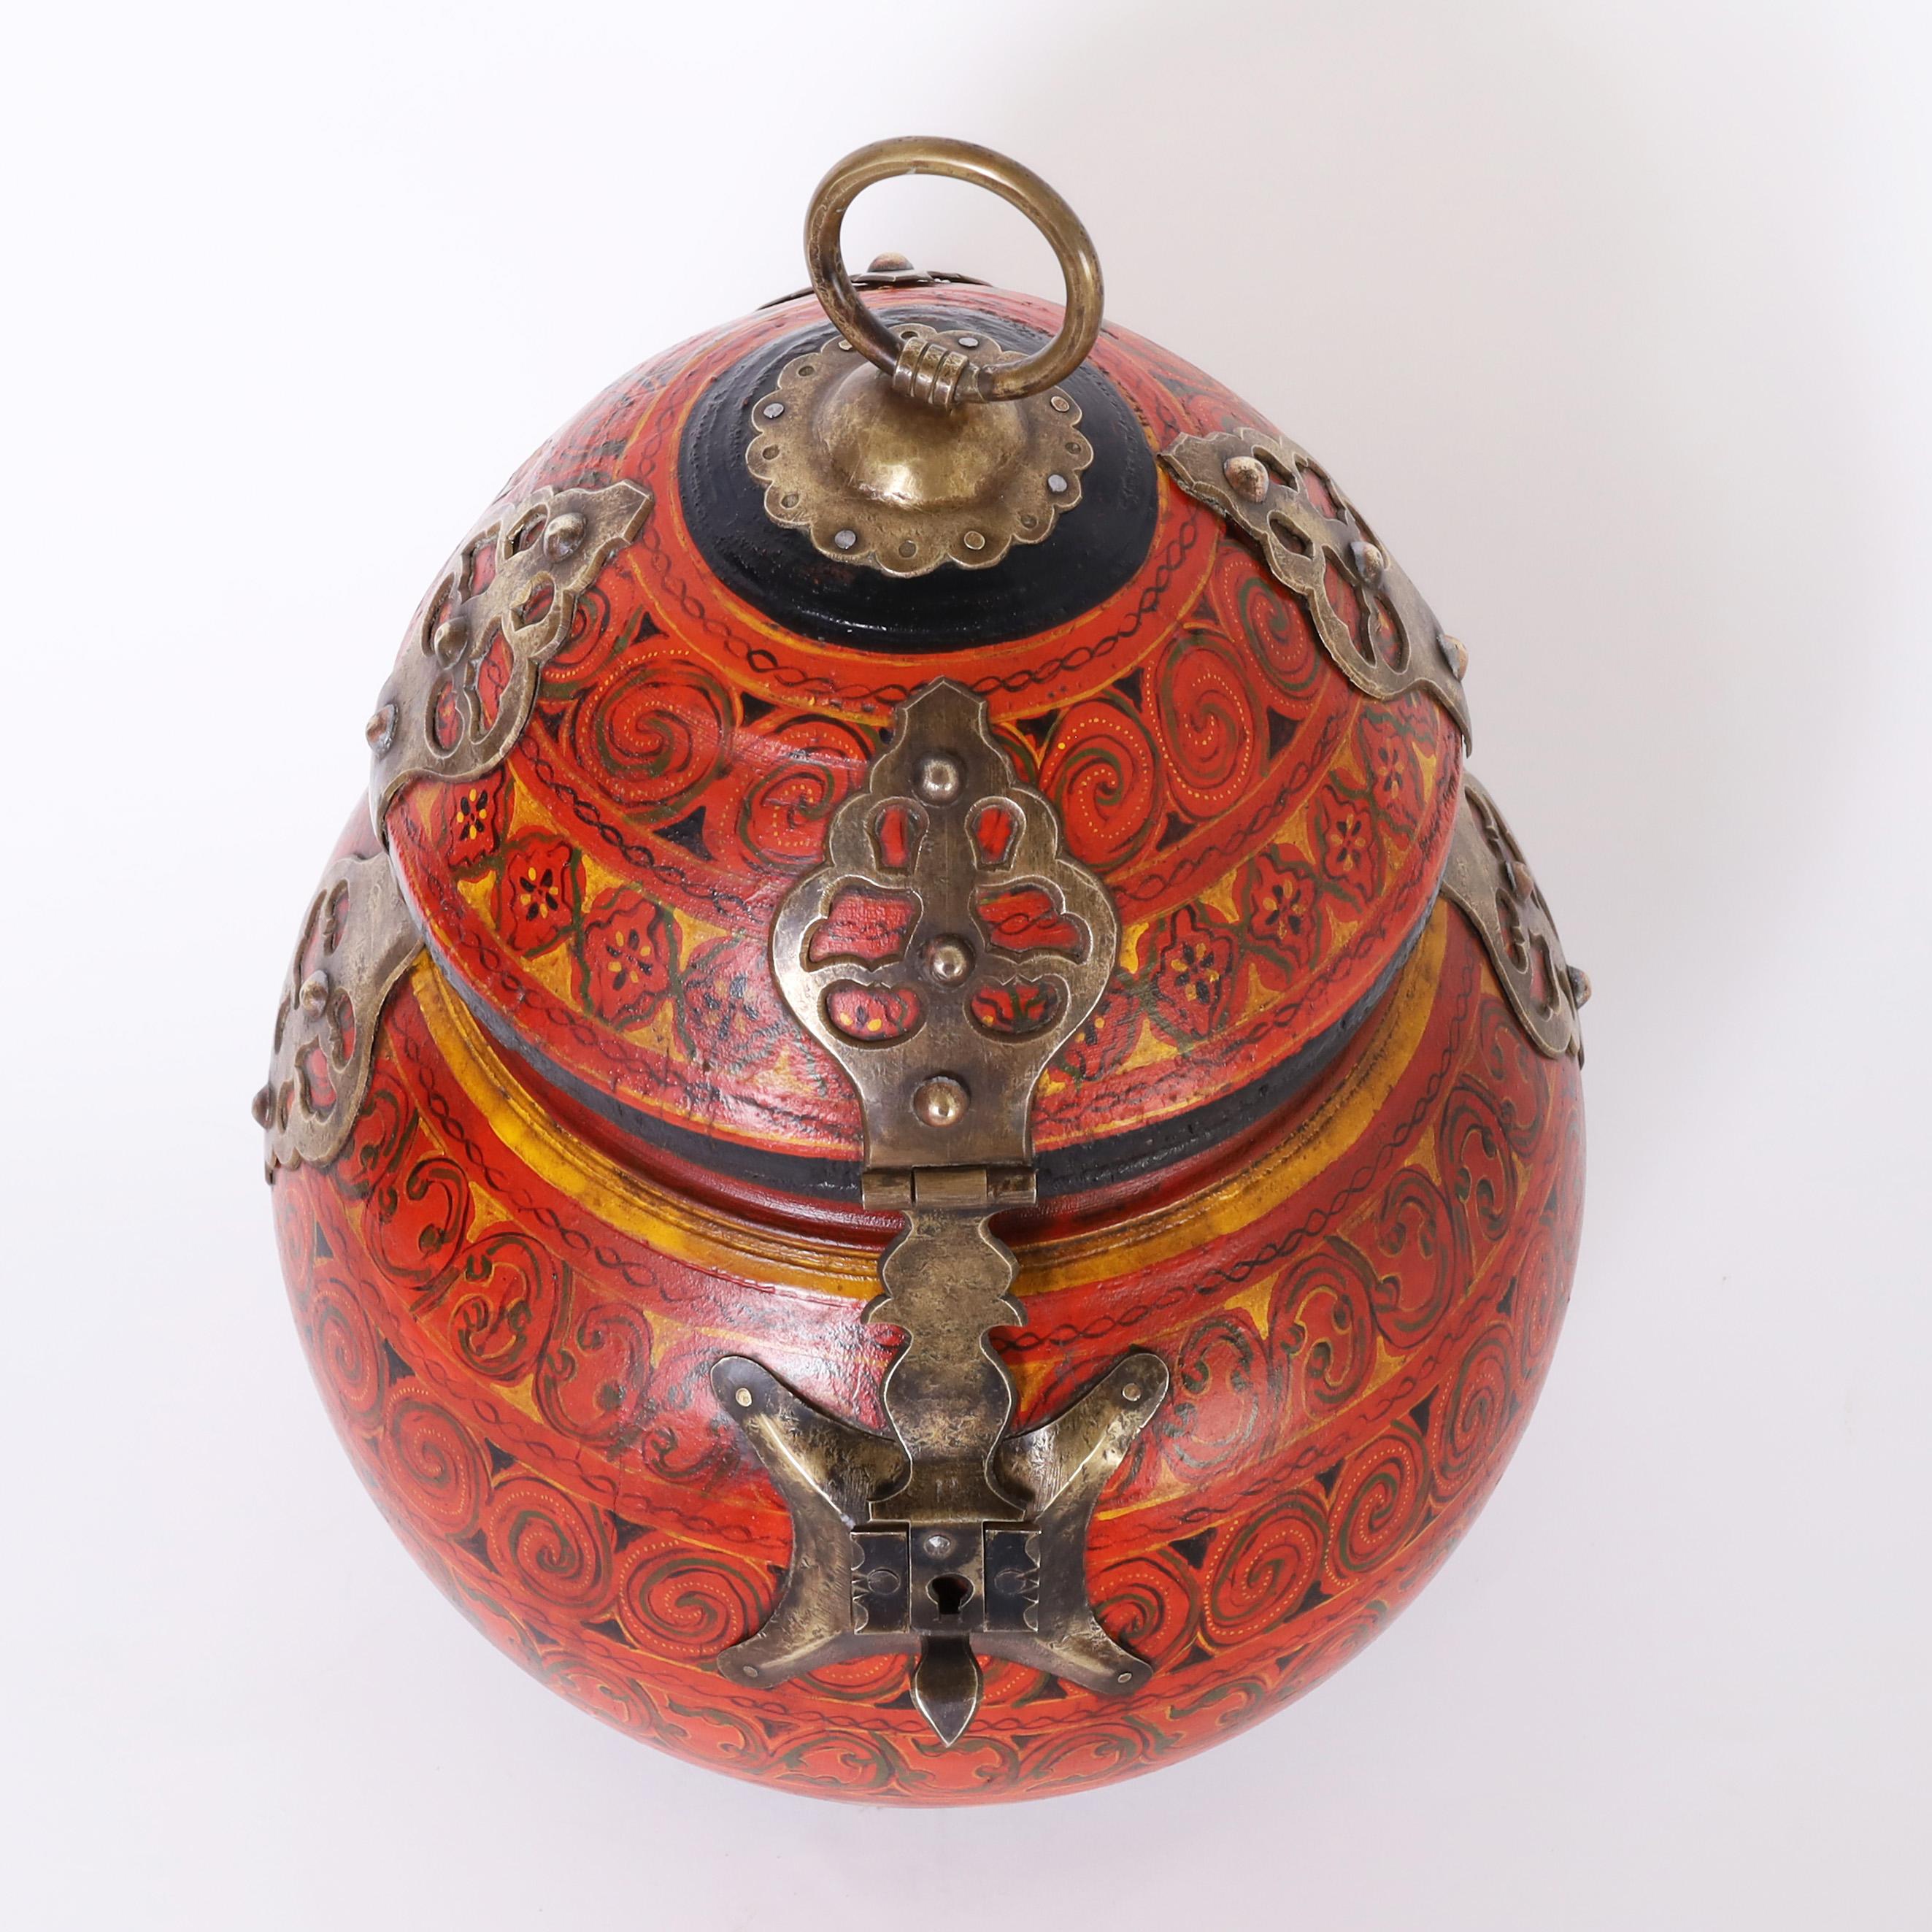 Striking gourd form vintage Moroccan lidded box or vessel hand crafted in indigenous wood and painted with floral designs in distinctive mediterranean colors highlighted with decorative brass hardware. 